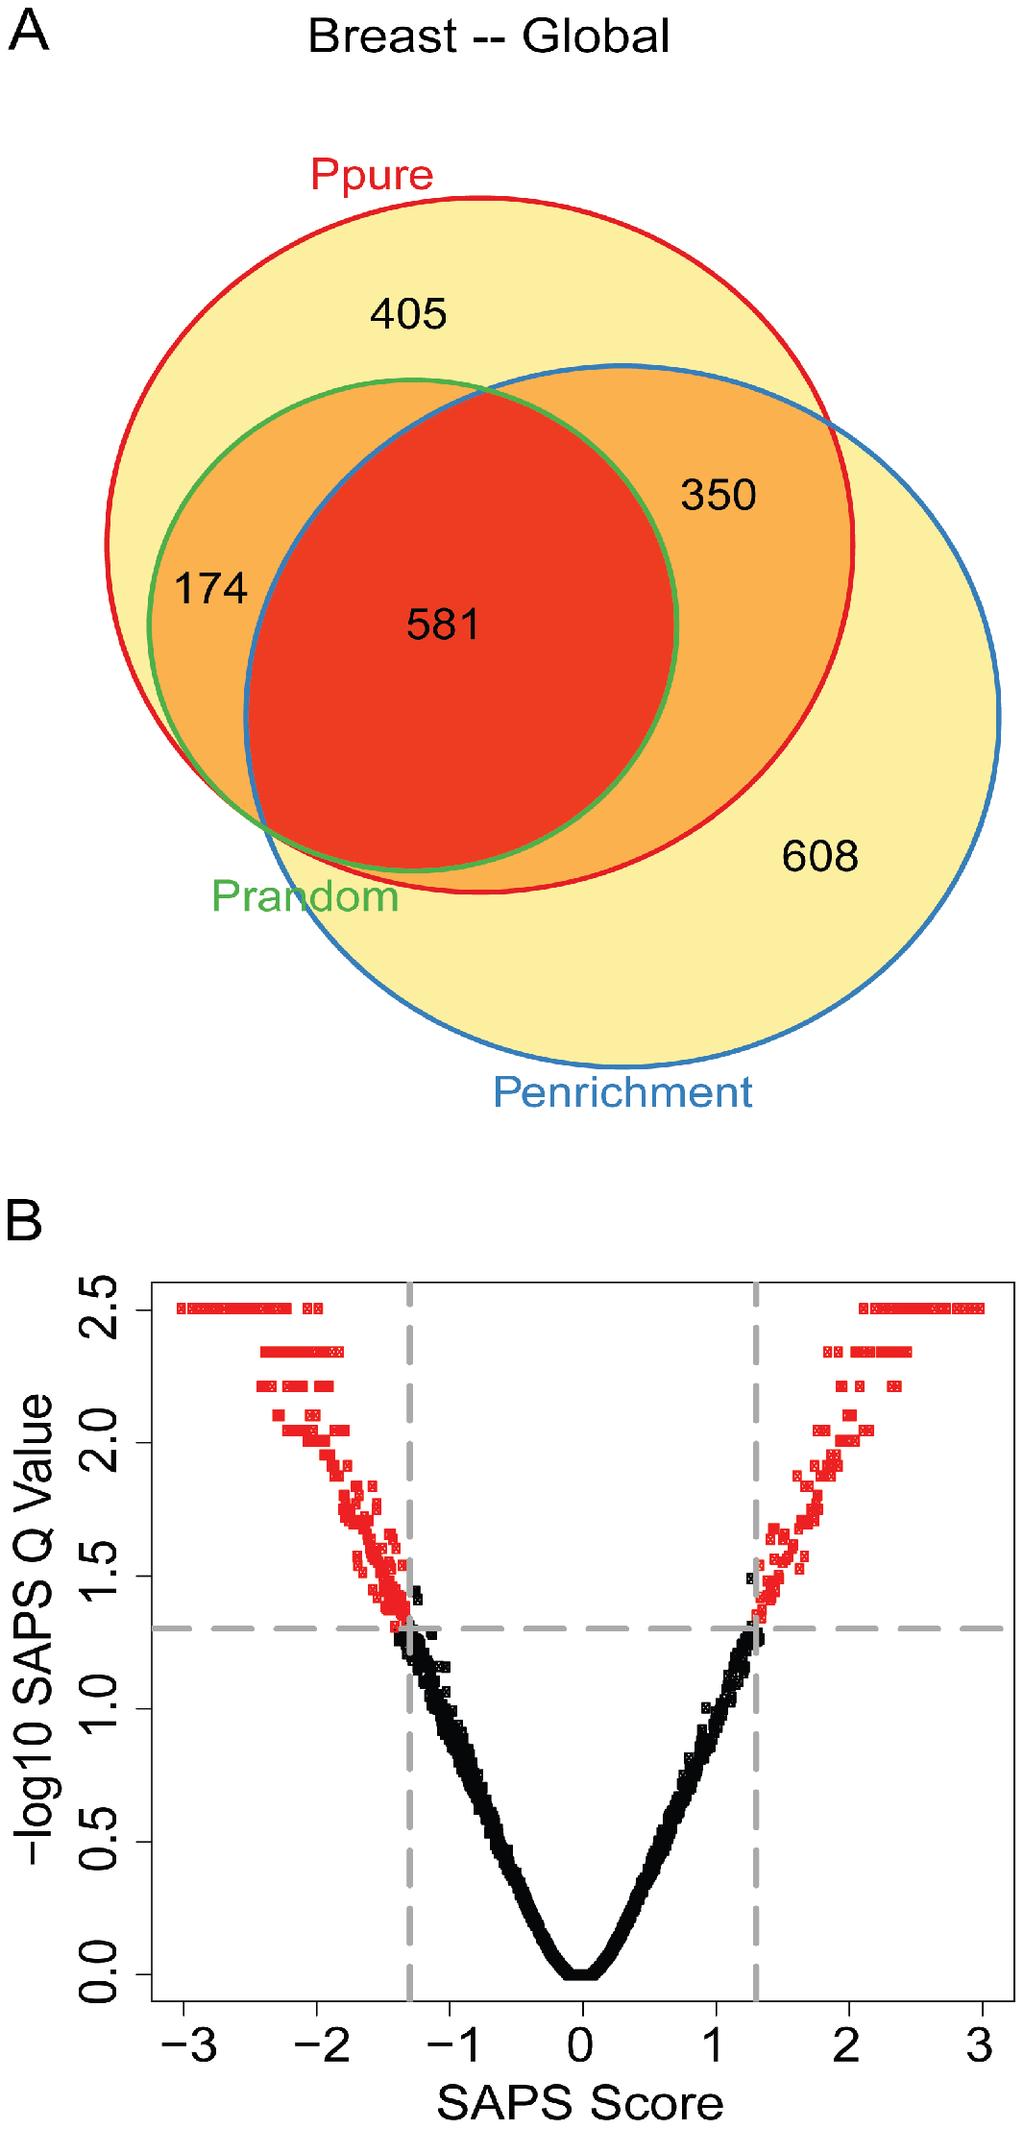 Figure 2. Global breast cancer Venn diagram and scatterplot. (A) The gene sets significant by at least one of the P values at the 0.05 level are displayed in a Venn diagram.